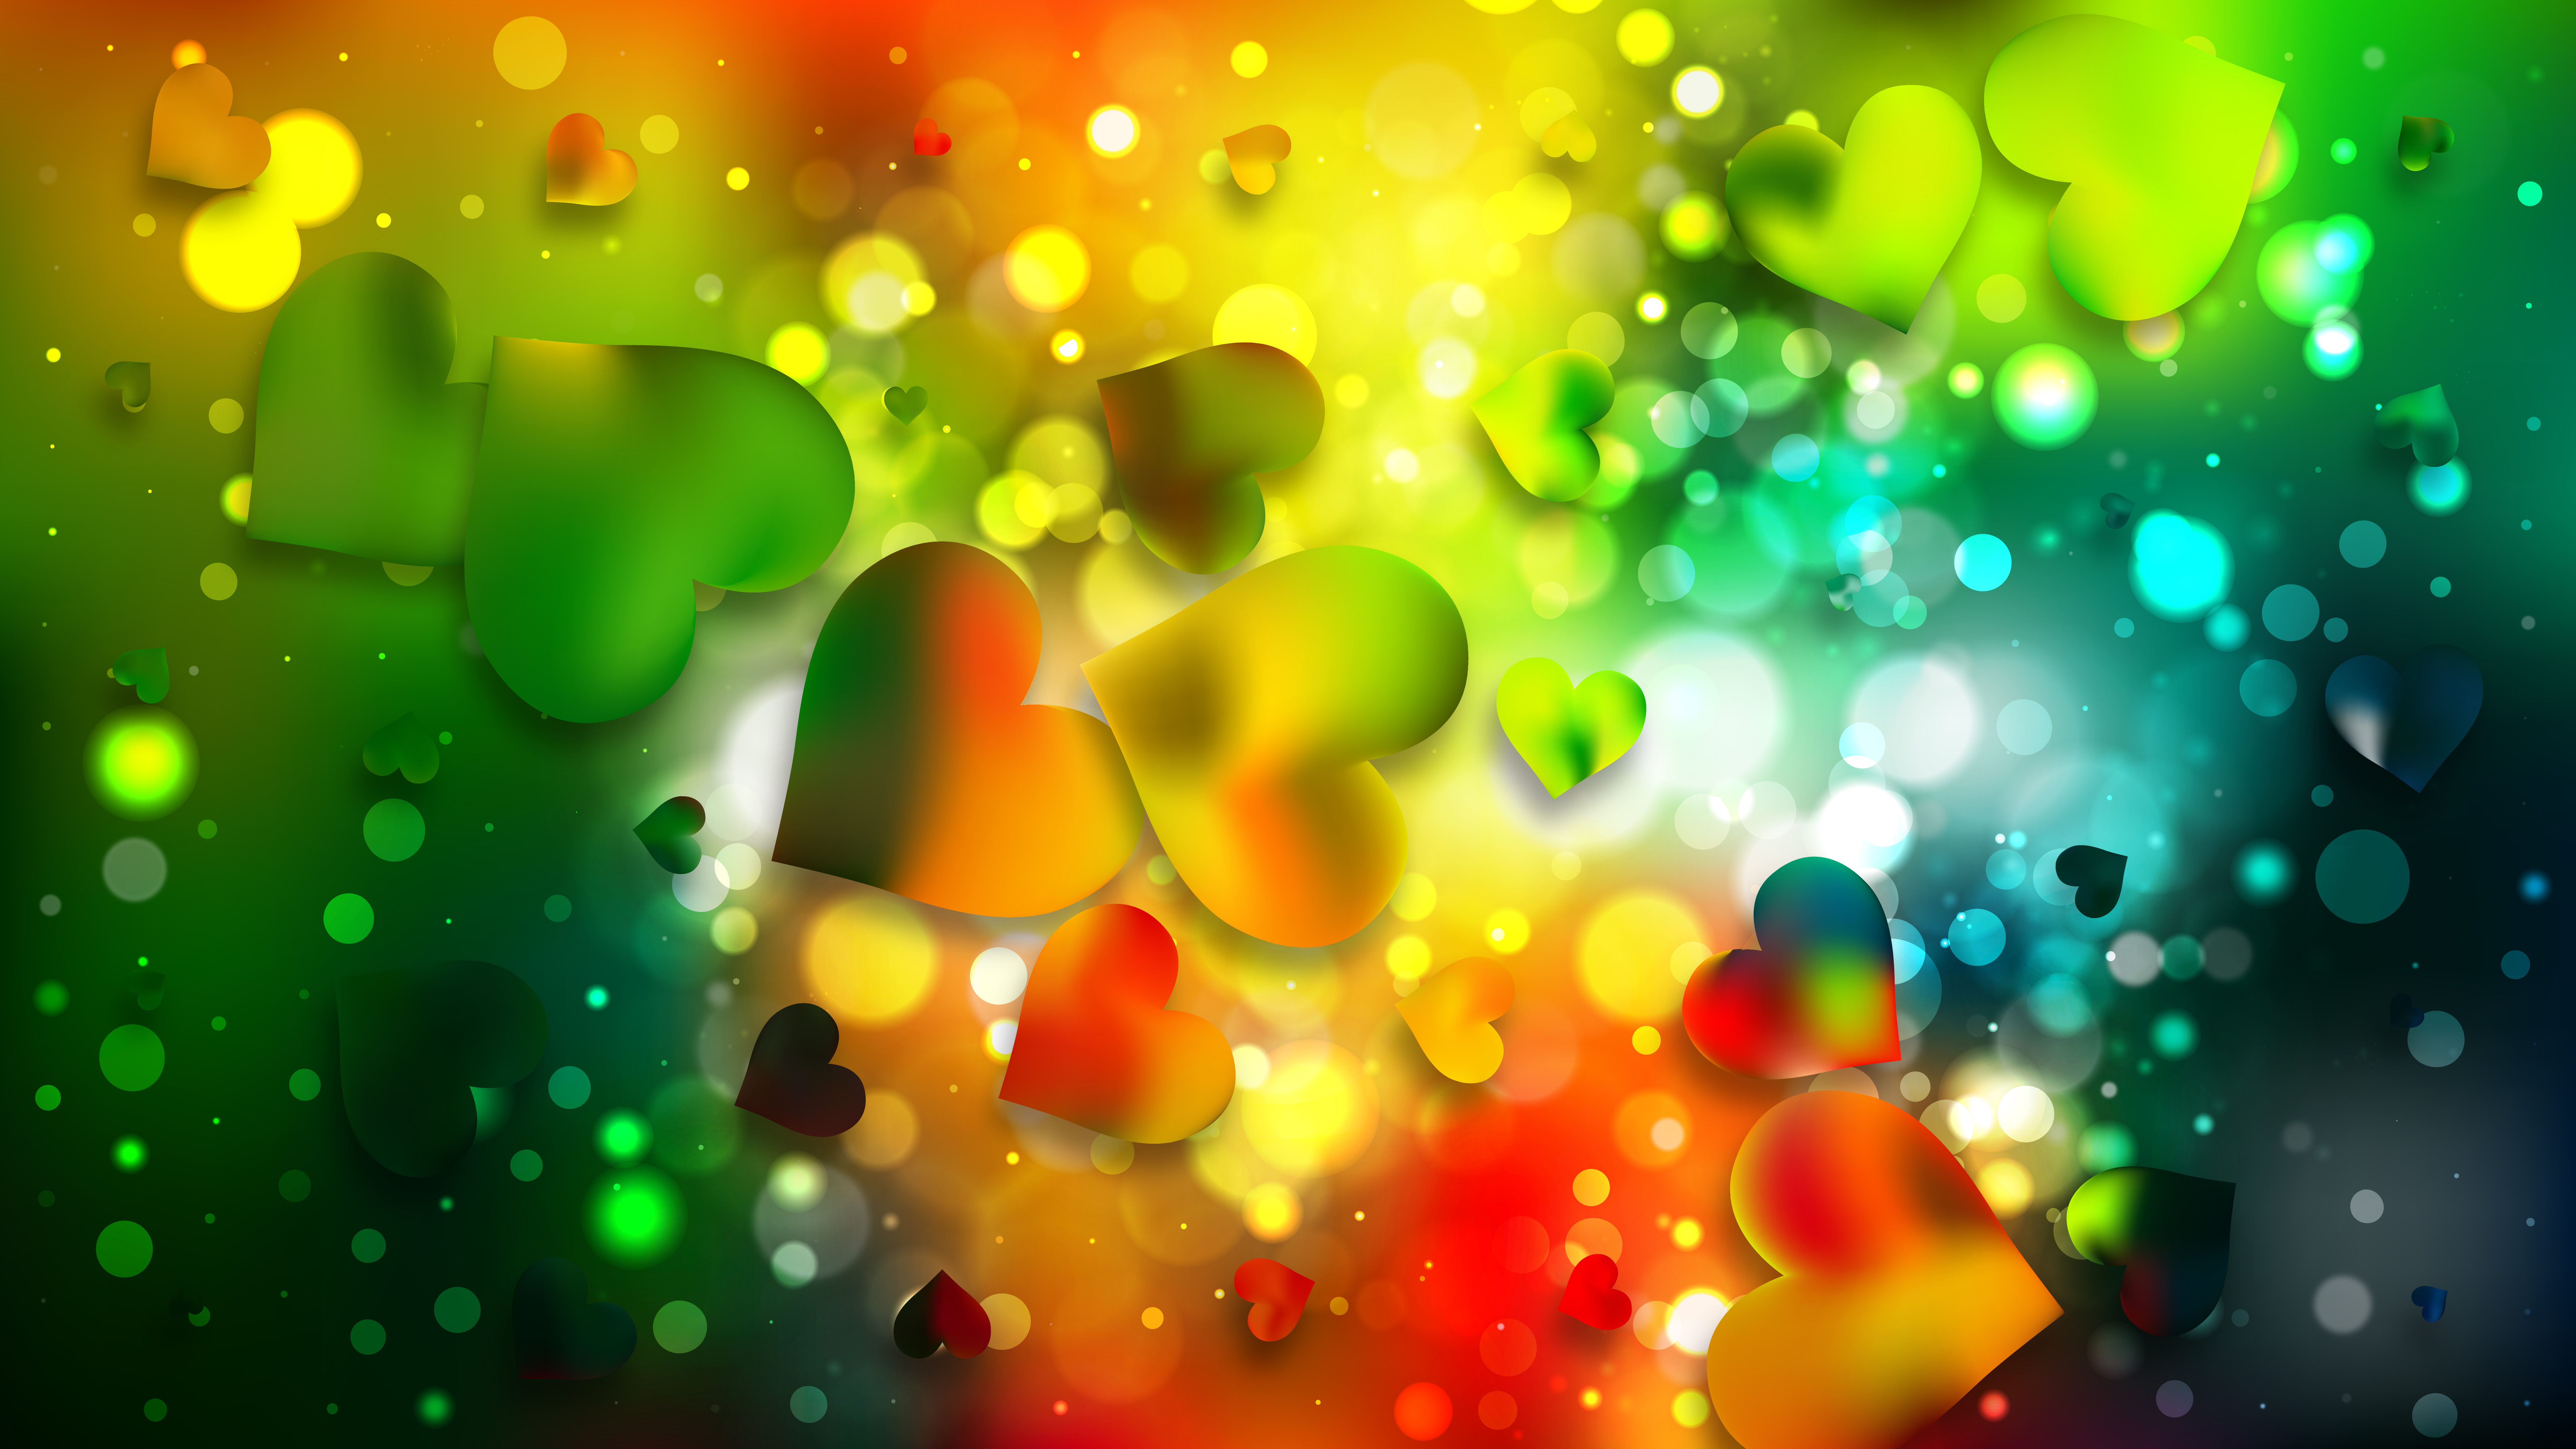 Colorful Heart Wallpaper Background Image - Green And Orange Heart , HD Wallpaper & Backgrounds